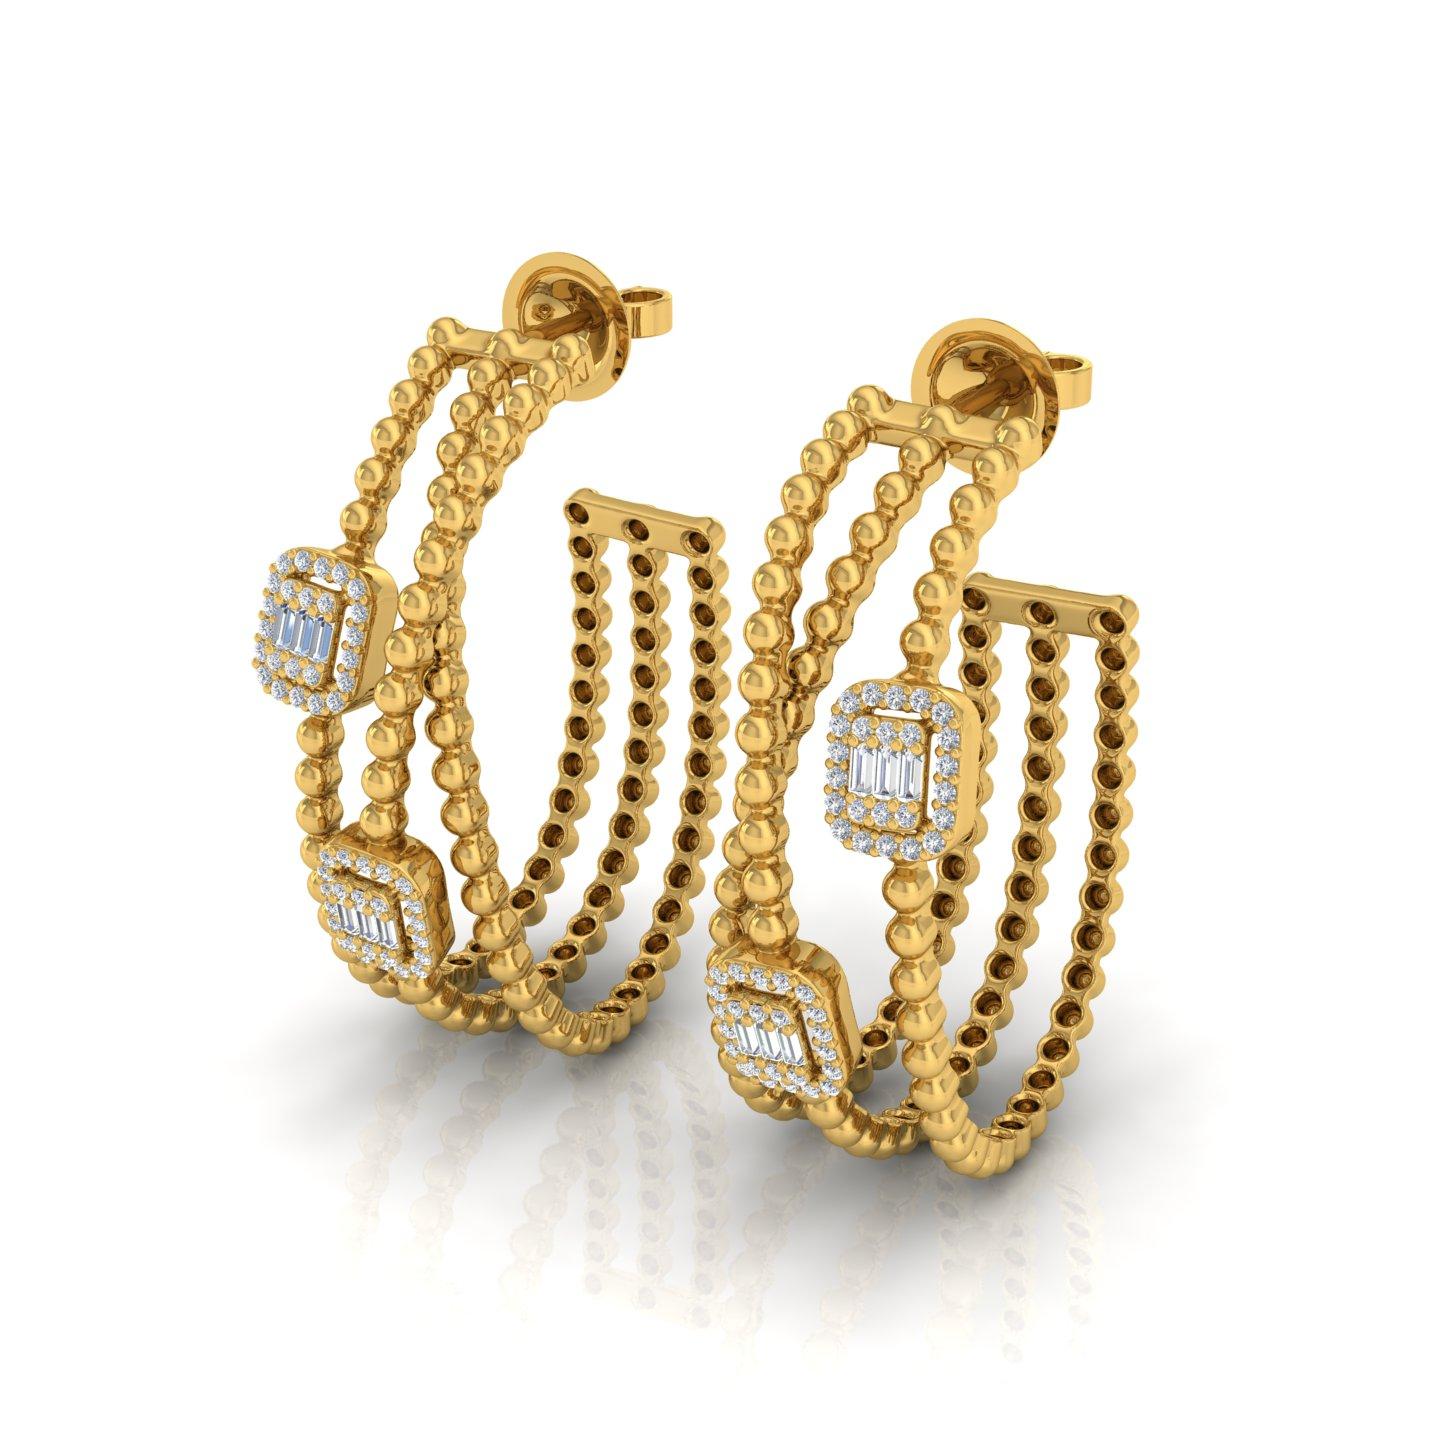 Code :- CN-25911
Gross Wt. :- 16.70 gm
18k Gold Wt. :- 16.56 gm
Diamond Wt. :- 0.72 Ct. ( AVERAGE DIAMOND CLARITY SI1-SI2 & COLOR H-I )
Earrings Size :- 37 x 28 mm approx.

✦ Sizing
.....................
We can adjust most items to fit your sizing